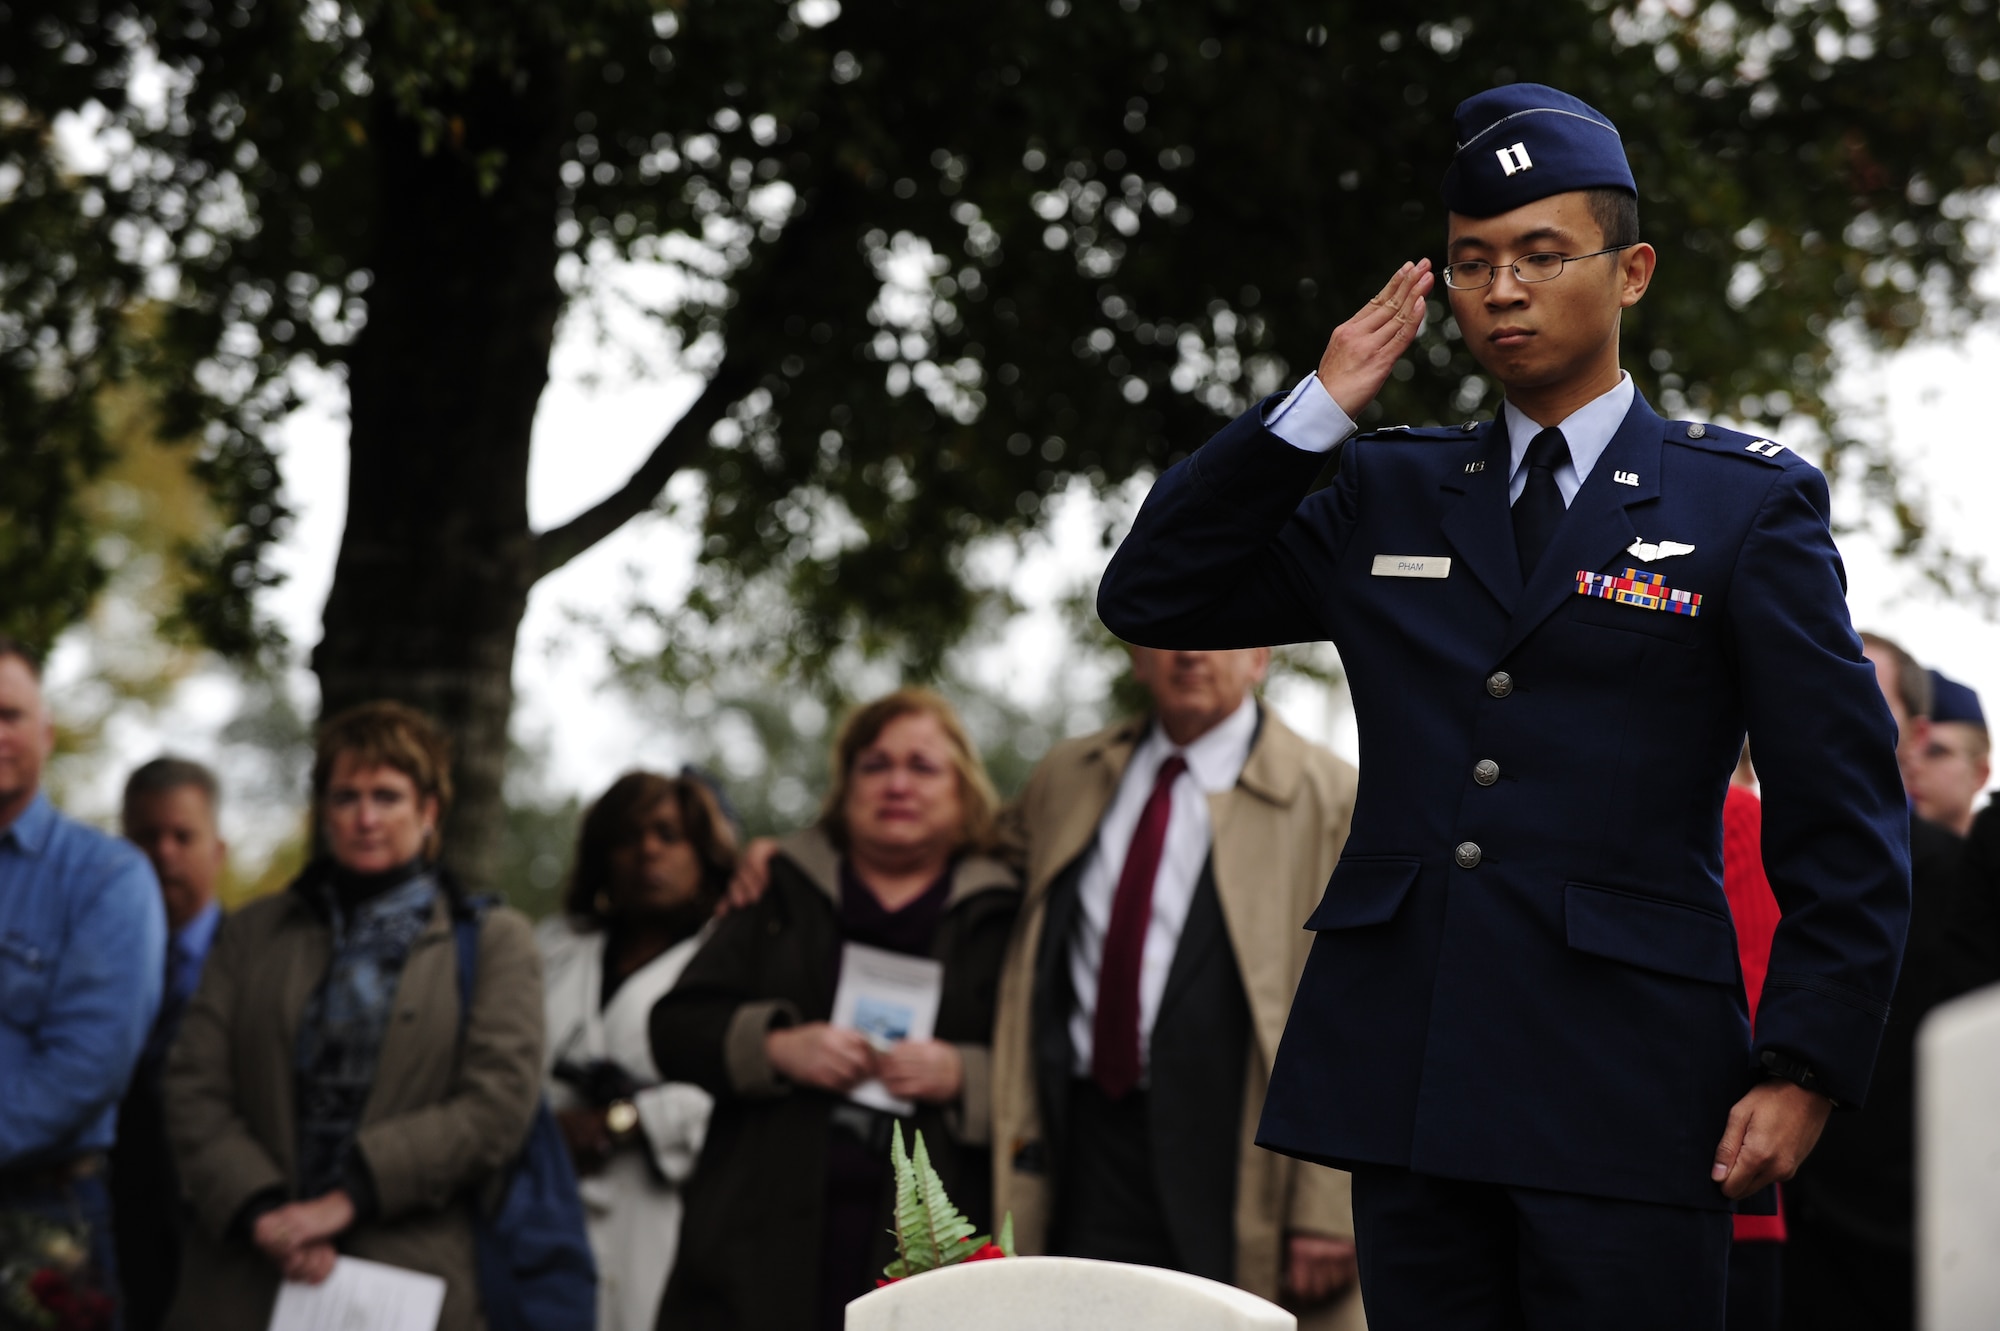 U.S. Air Force Capt. Manh Pham, 16th Special Operations Squadron, salutes the gravestone of Tech. Sgt. John L. Oeslchlager during a wreath-laying ceremony, Jan. 31, 2011, at the Barrancas National Cemetery, Pensacola Naval Air Station, Fla. The ceremony marked the 20th anniversary of when 14 Airmen lost their lives when Spirit 03, an AC-130H Spectre gunship, was shot down by enemy fire in support of Operation Desert Storm Jan. 31, 1991. (U.S. Air Force photo by Staff Sgt. Julianne M. Showalter/Released)